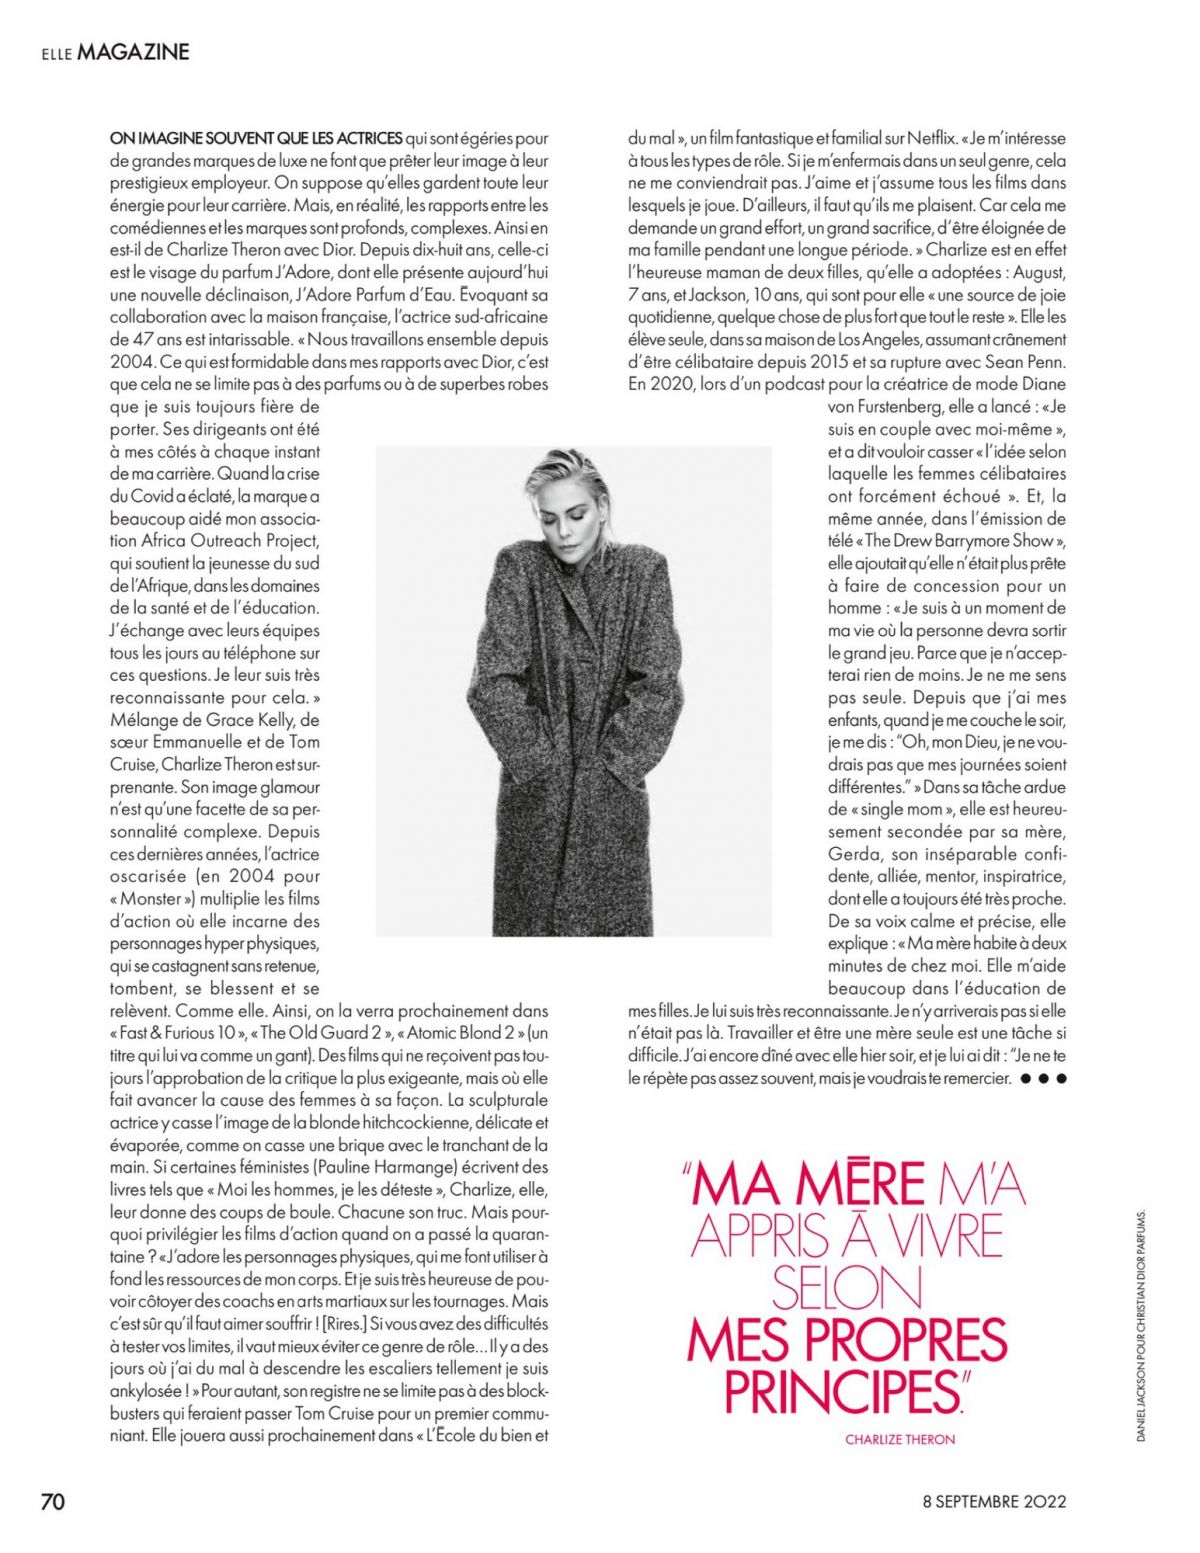 Charlize Theron in Elle Magazine France, September 2022 Issue 6